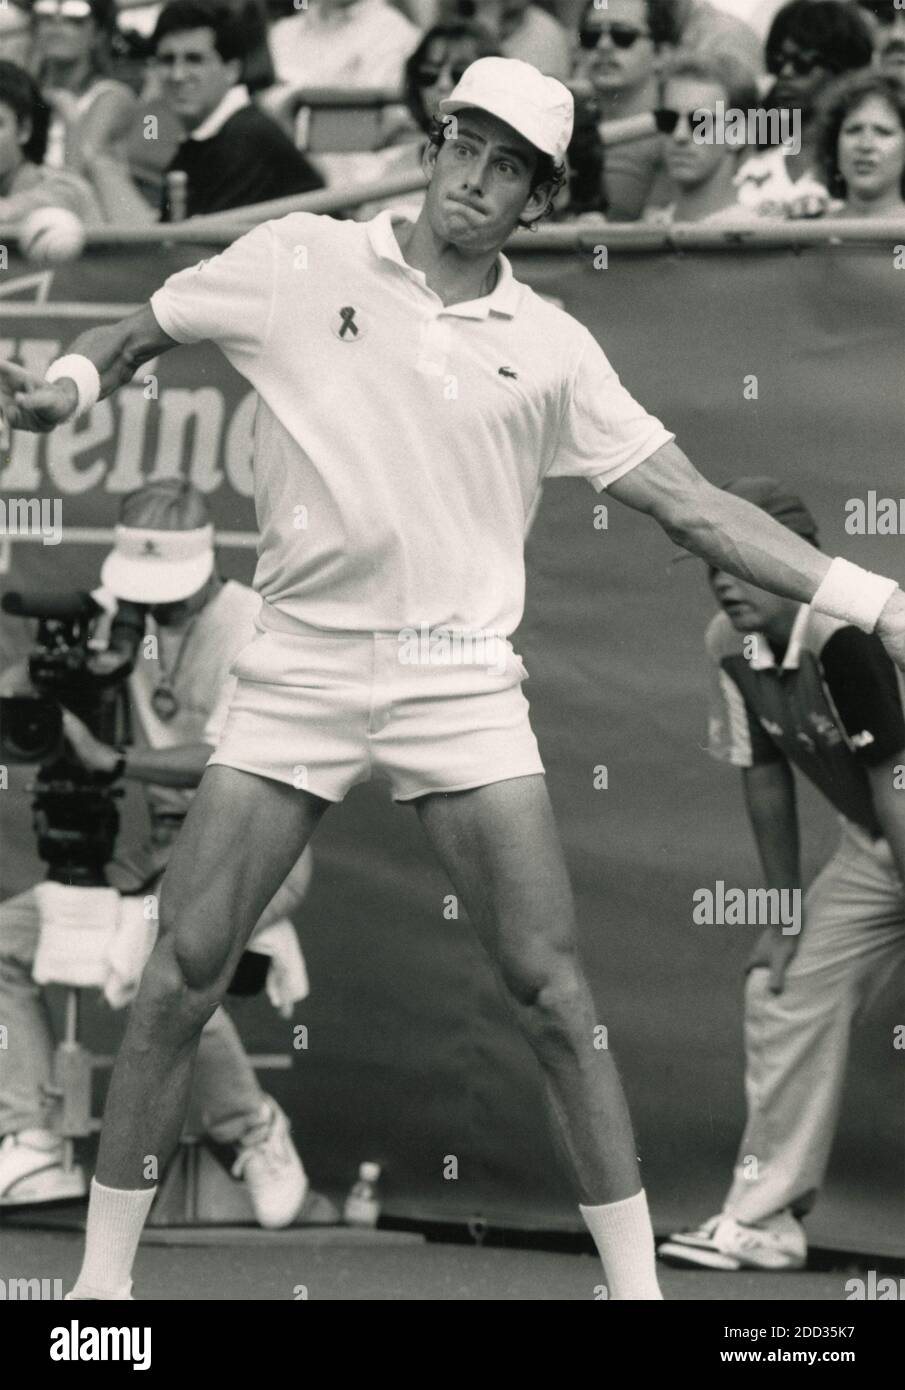 French tennis player Guy Forget, 1990s Stock Photo - Alamy